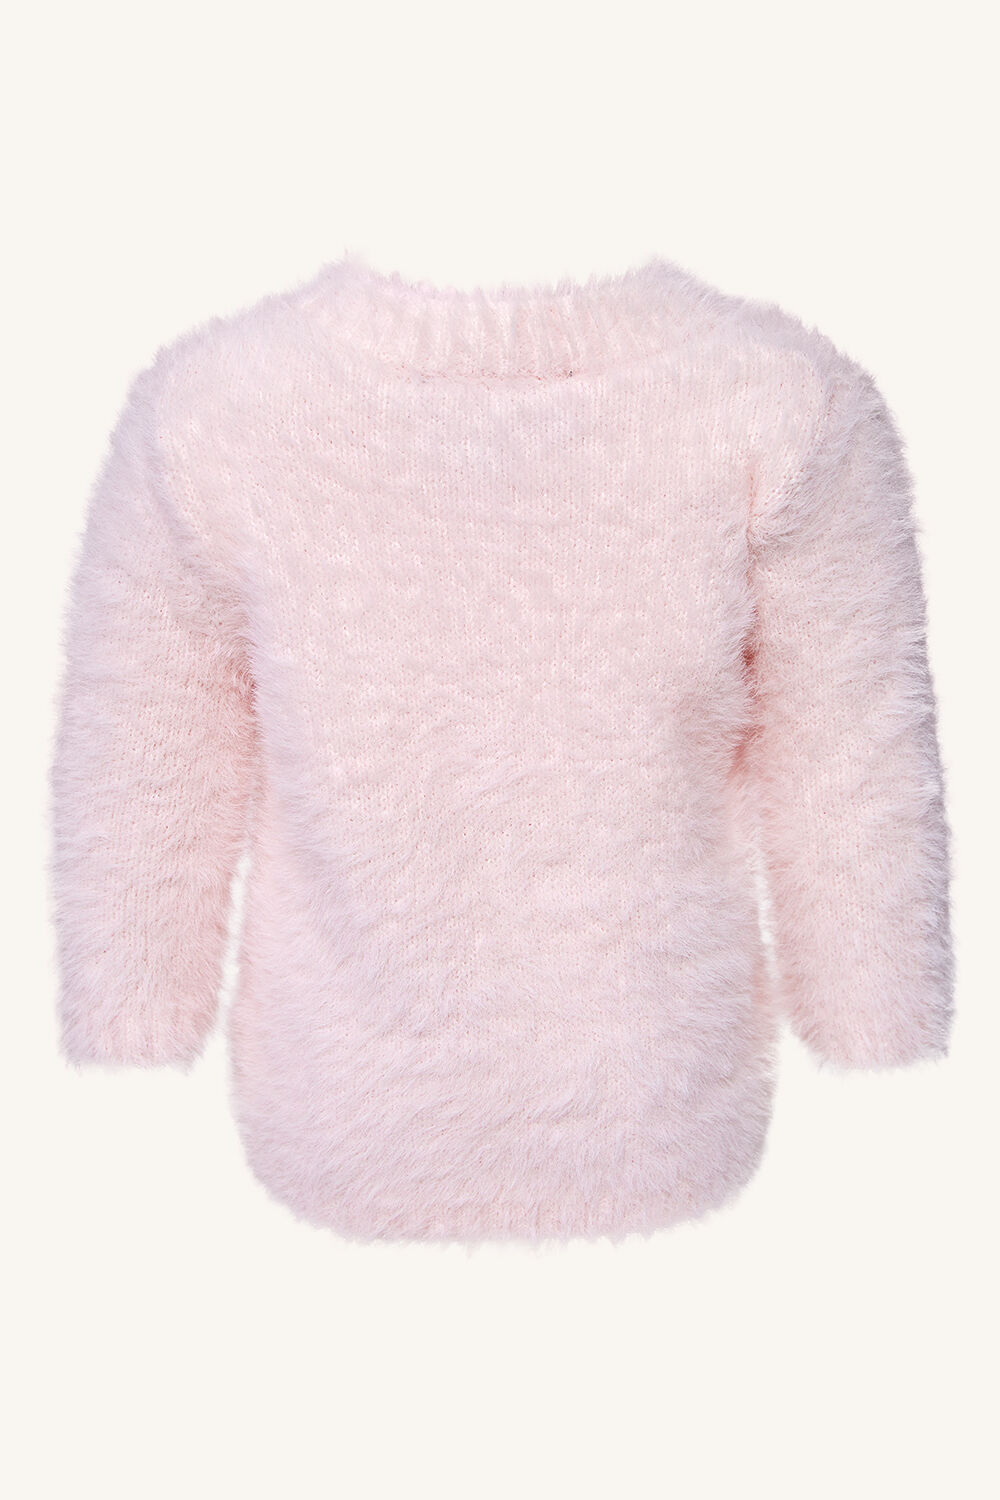 BABY GIRL FLUFFY BUNNY JUMPER in colour SOFT PINK